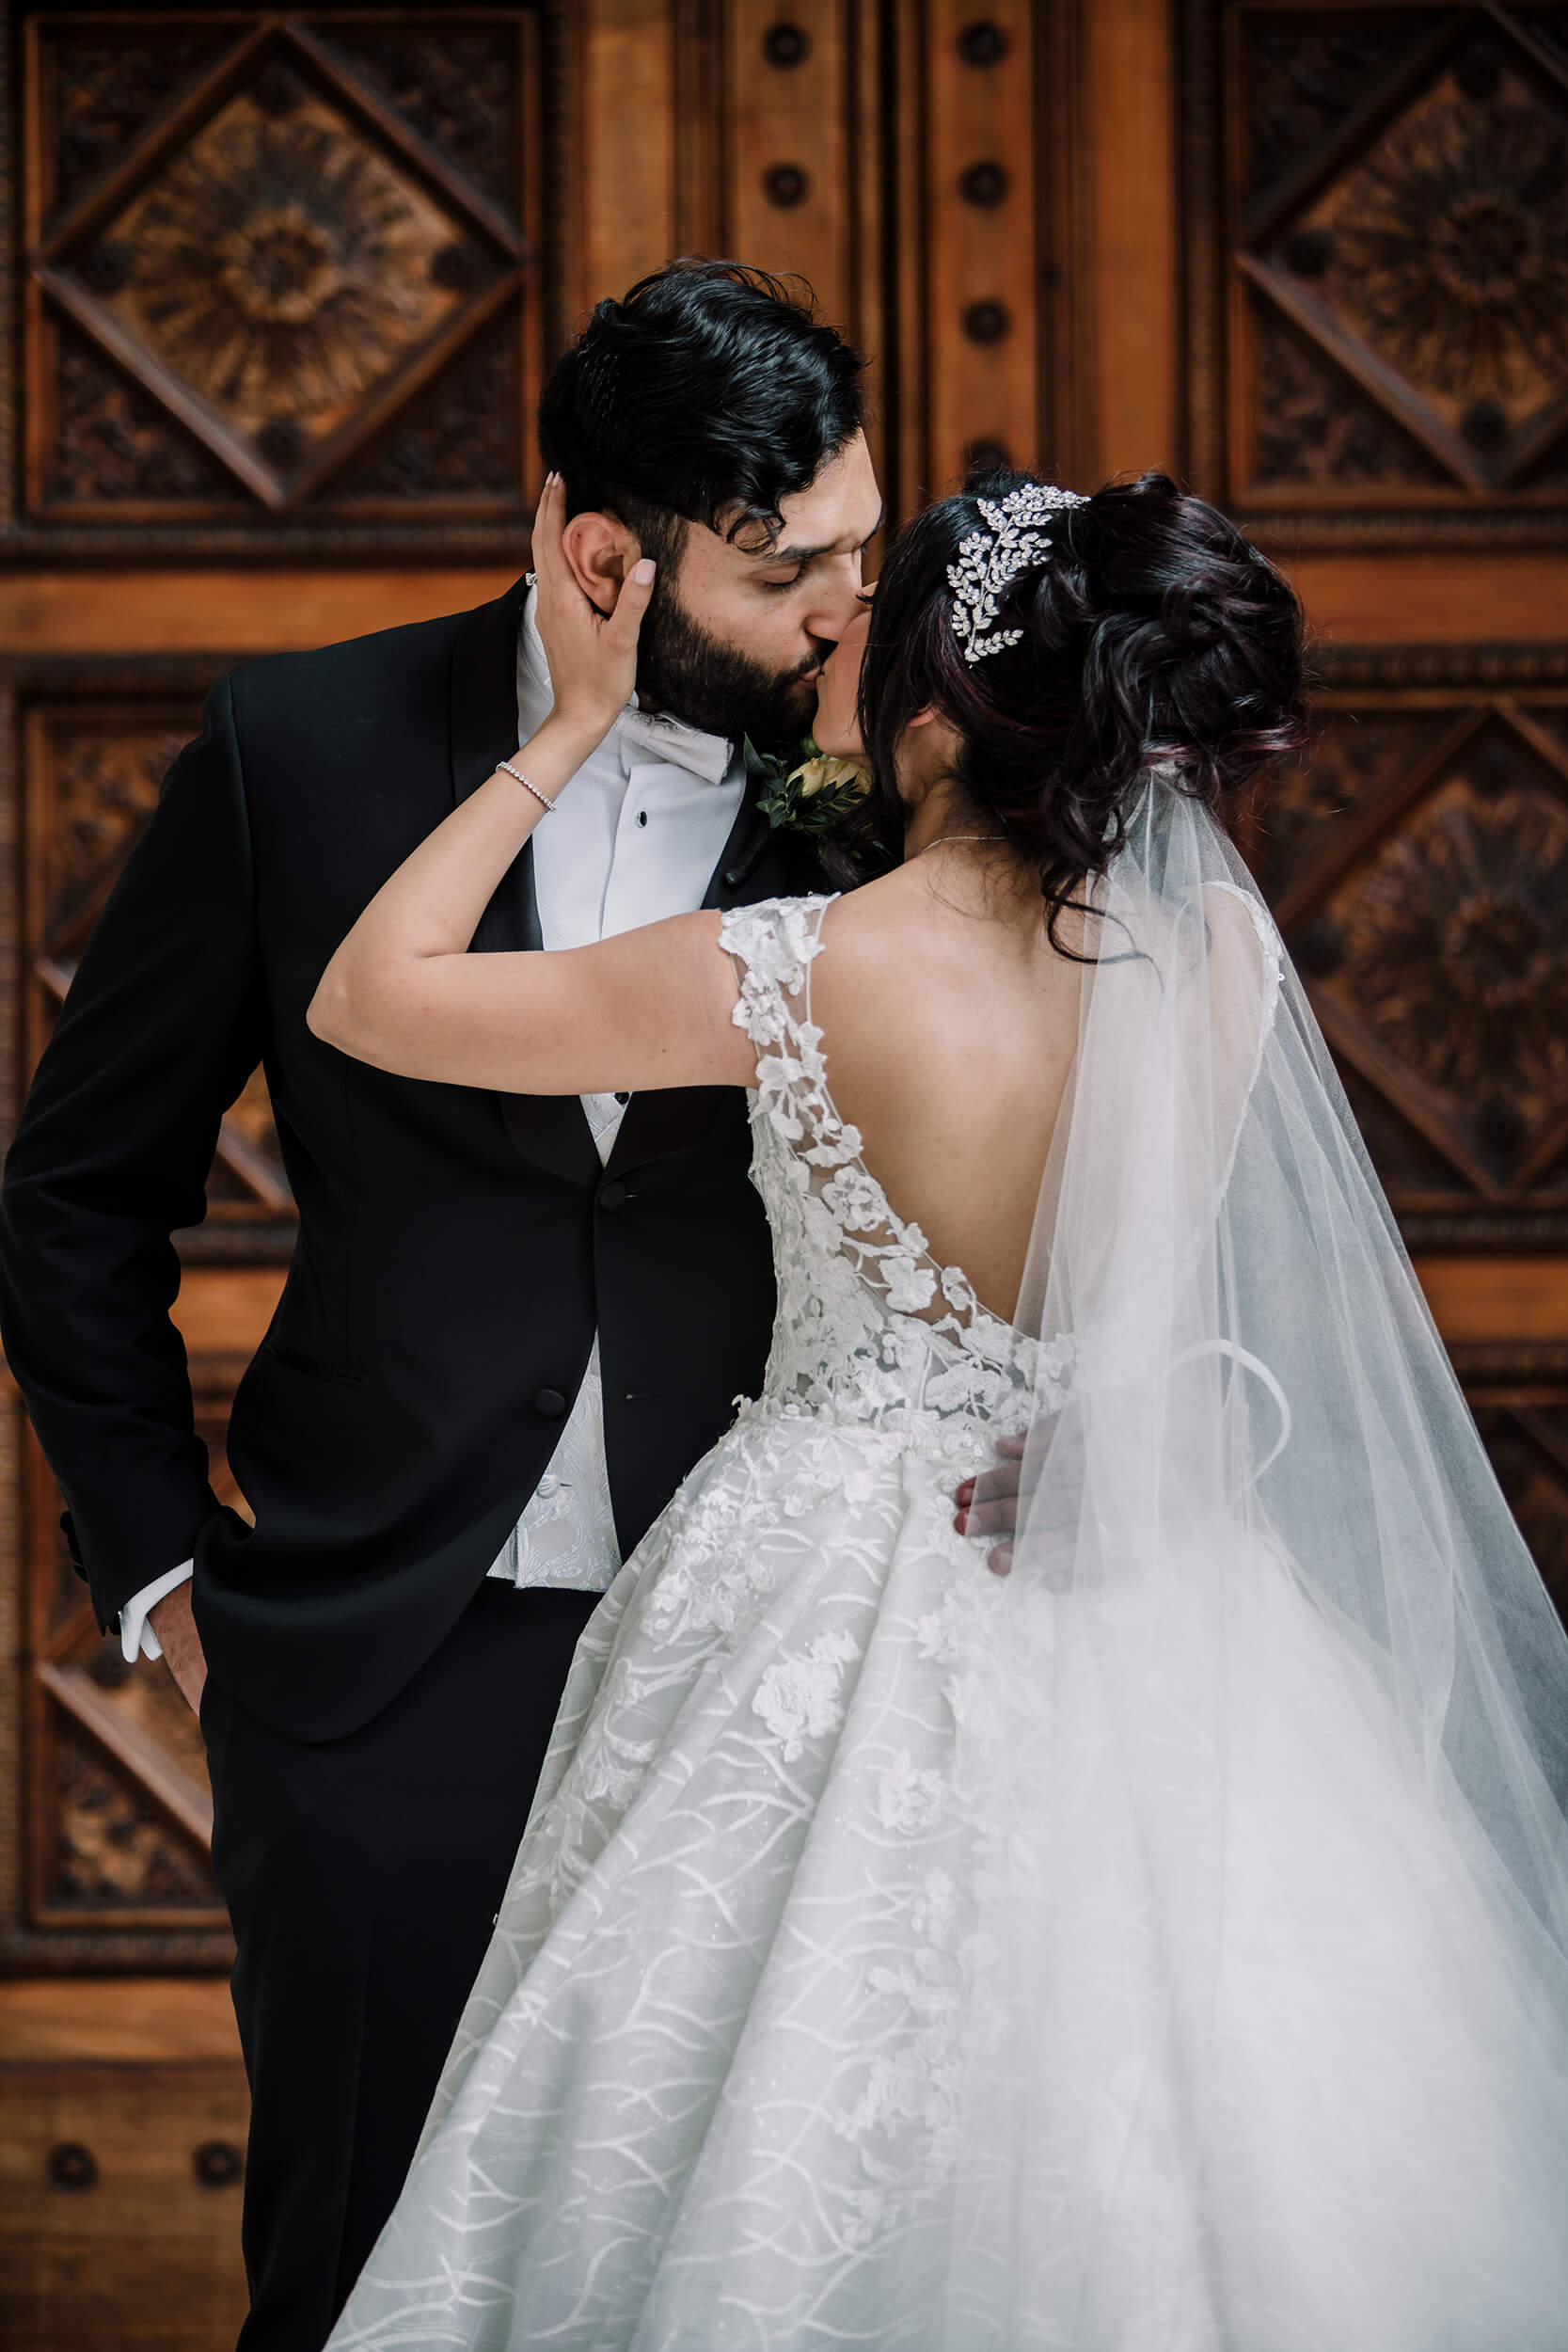 A beautiful kiss by the newly weds captured by Black Avenue Productions